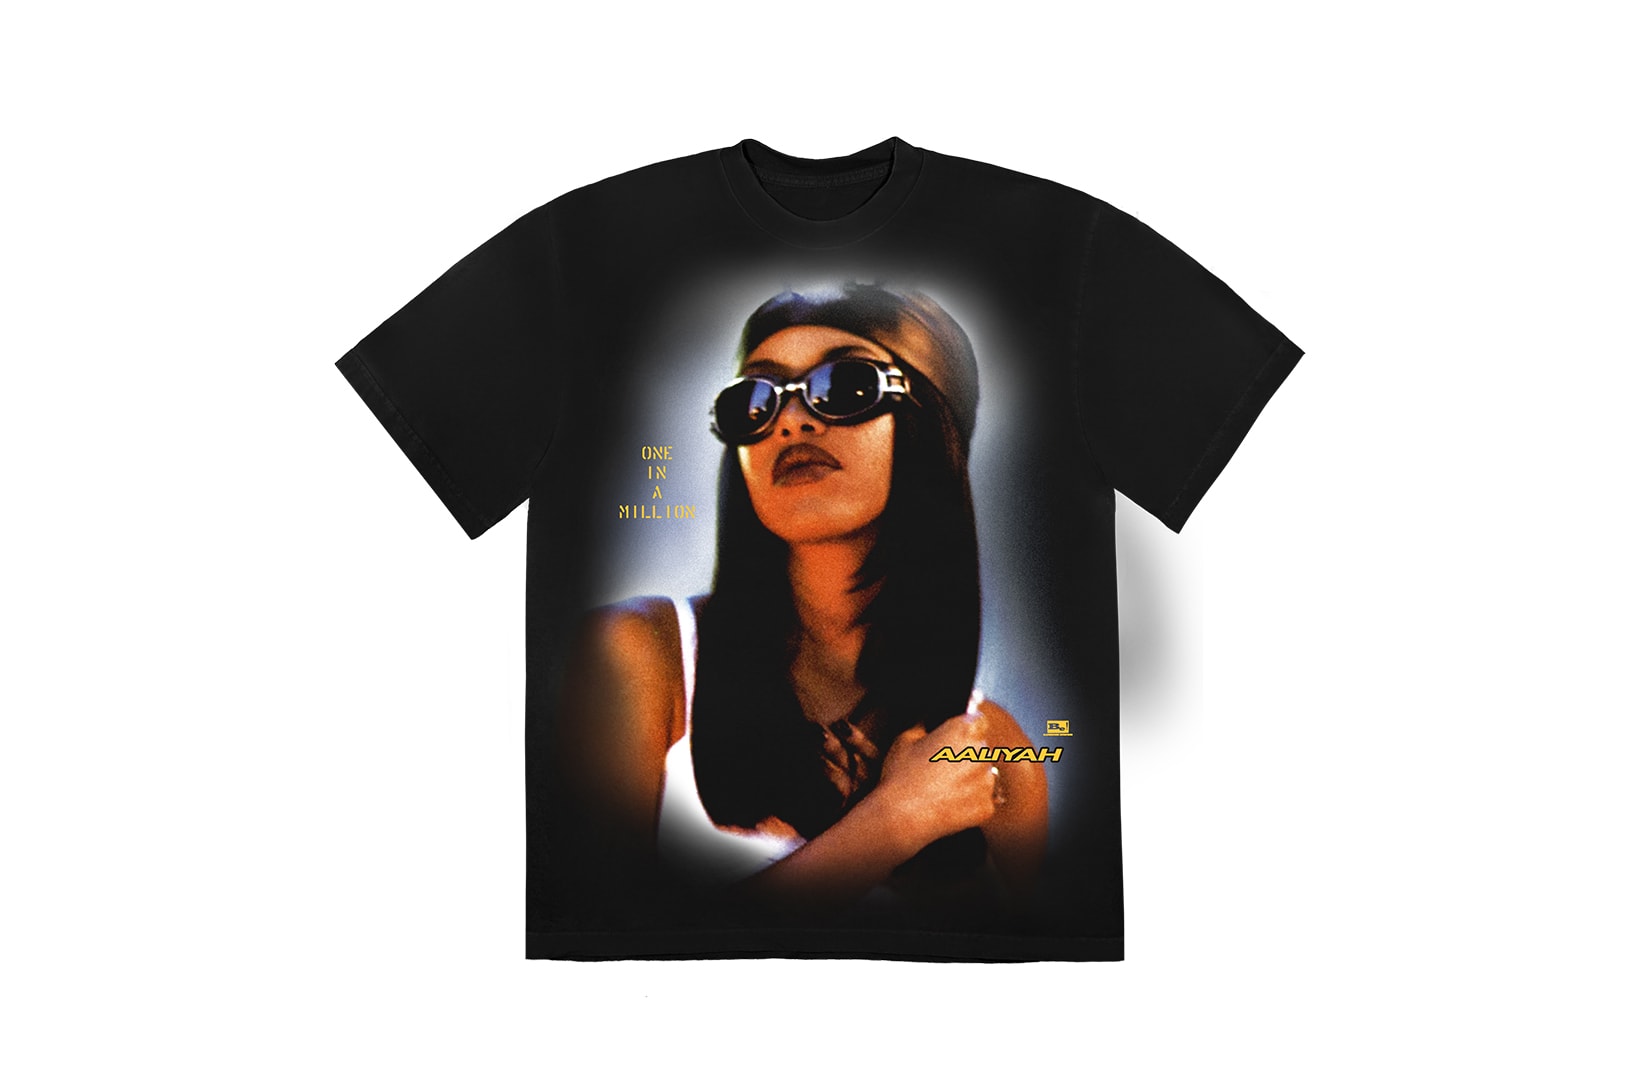 Aaliyah One In A Million Album Merch Collection tshirt tee